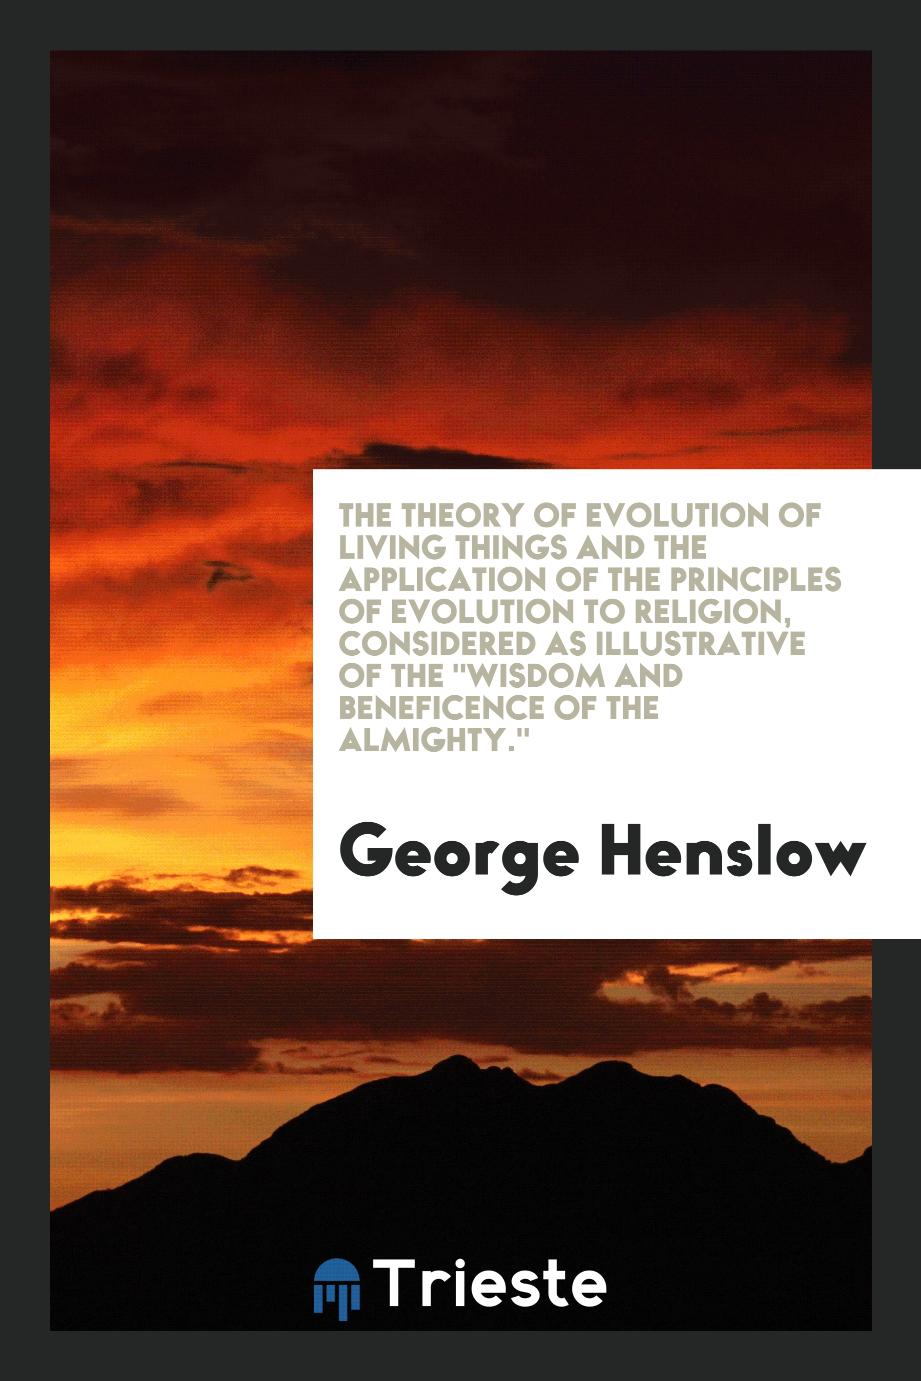 The theory of evolution of living things and the application of the principles of evolution to religion, considered as illustrative of the "Wisdom and beneficence of the Almighty."